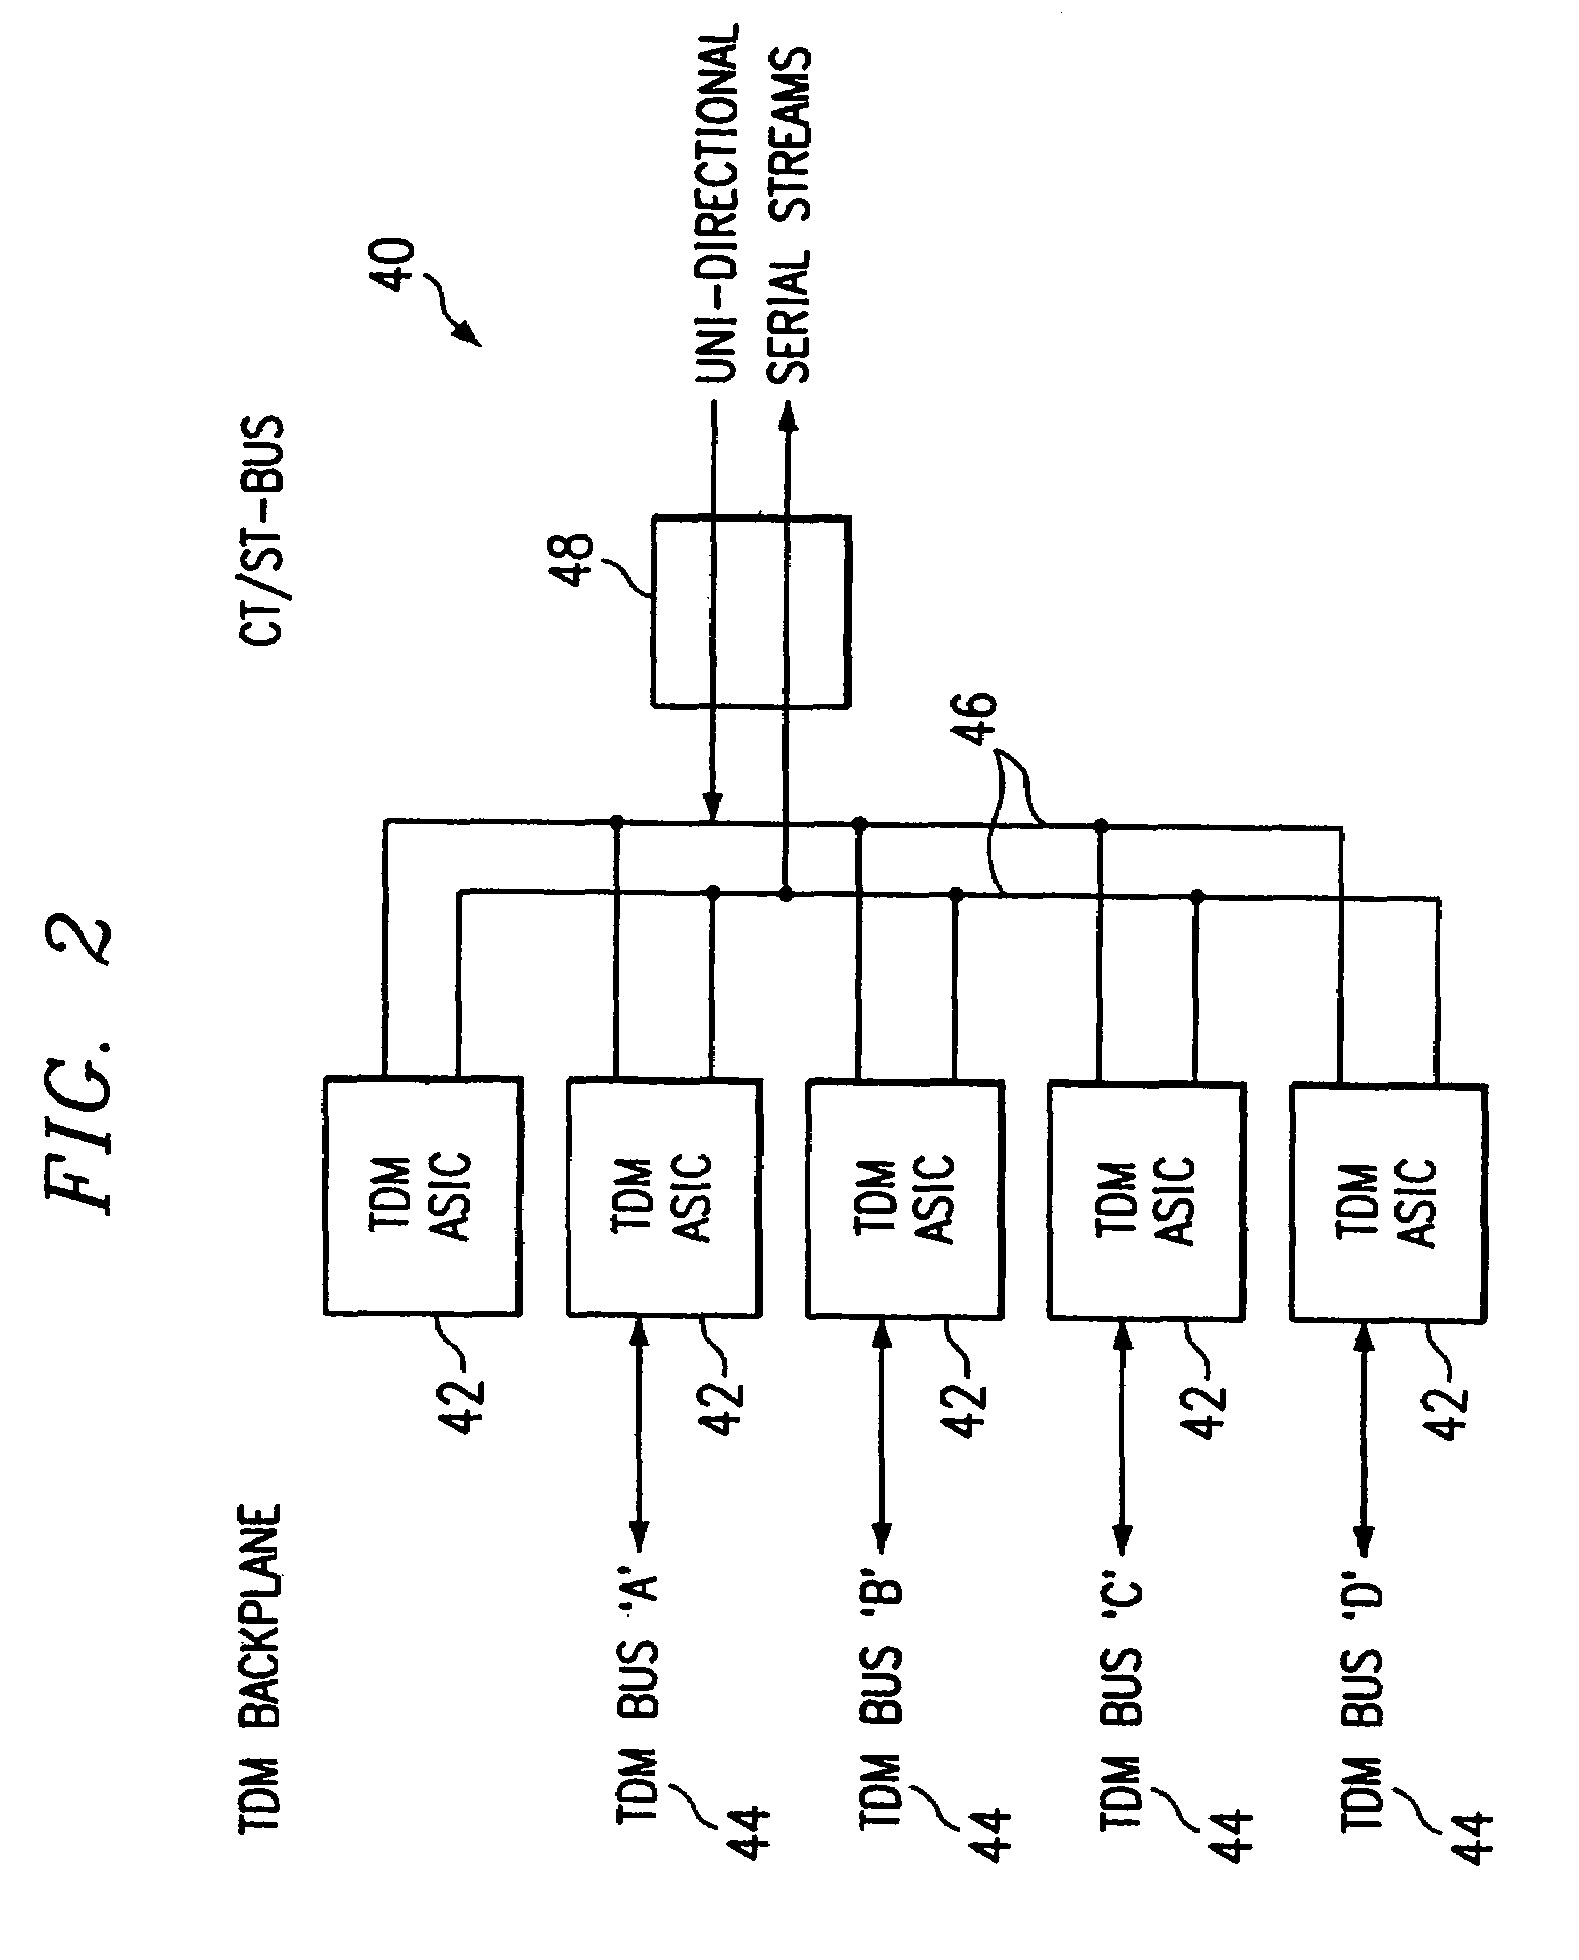 TDM switching system and ASIC device